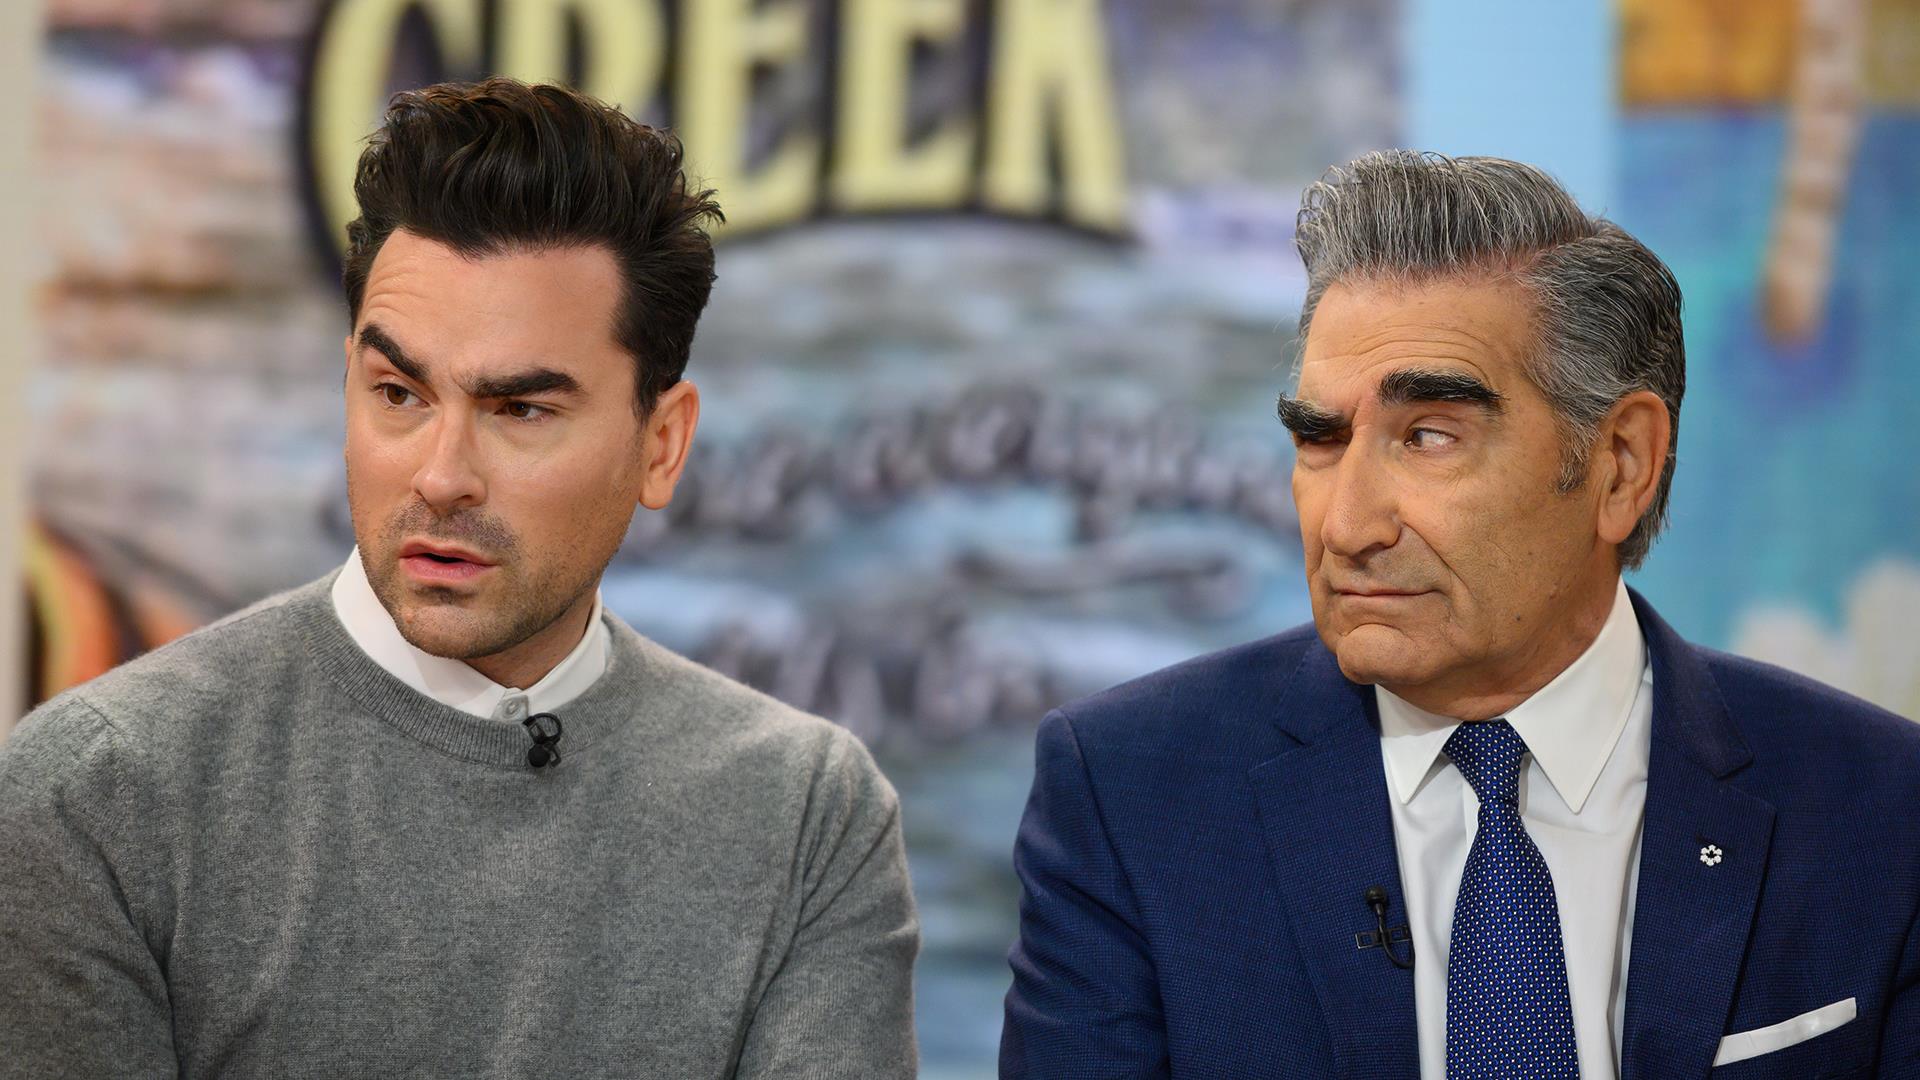 Watch 'Schitt's Creek' stars Eugene Levy and Dan Levy have a brow-off